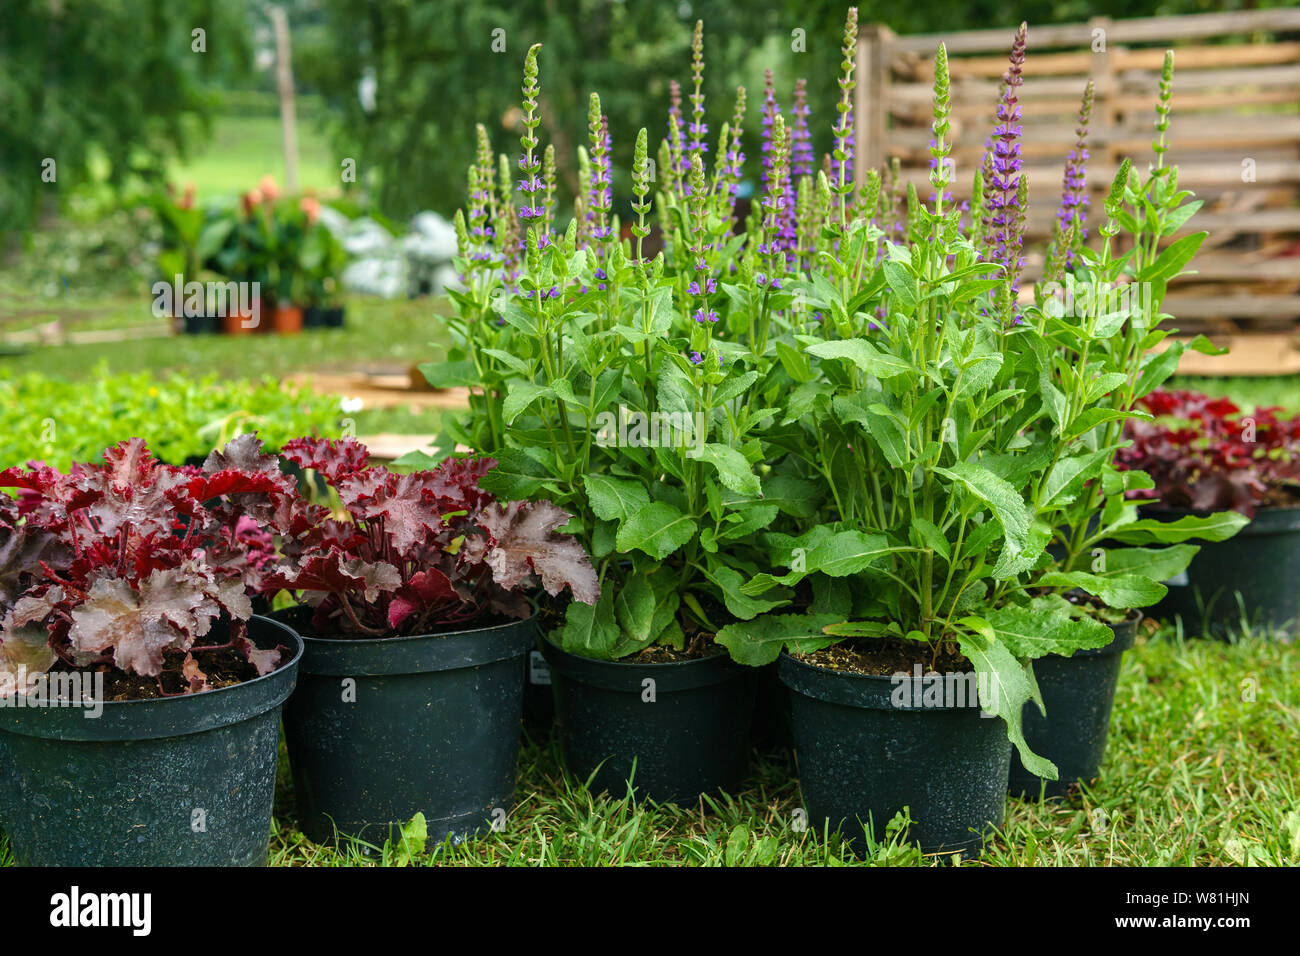 ornamental potted plants prepared for planting in open ground, outdoor Stock Photo